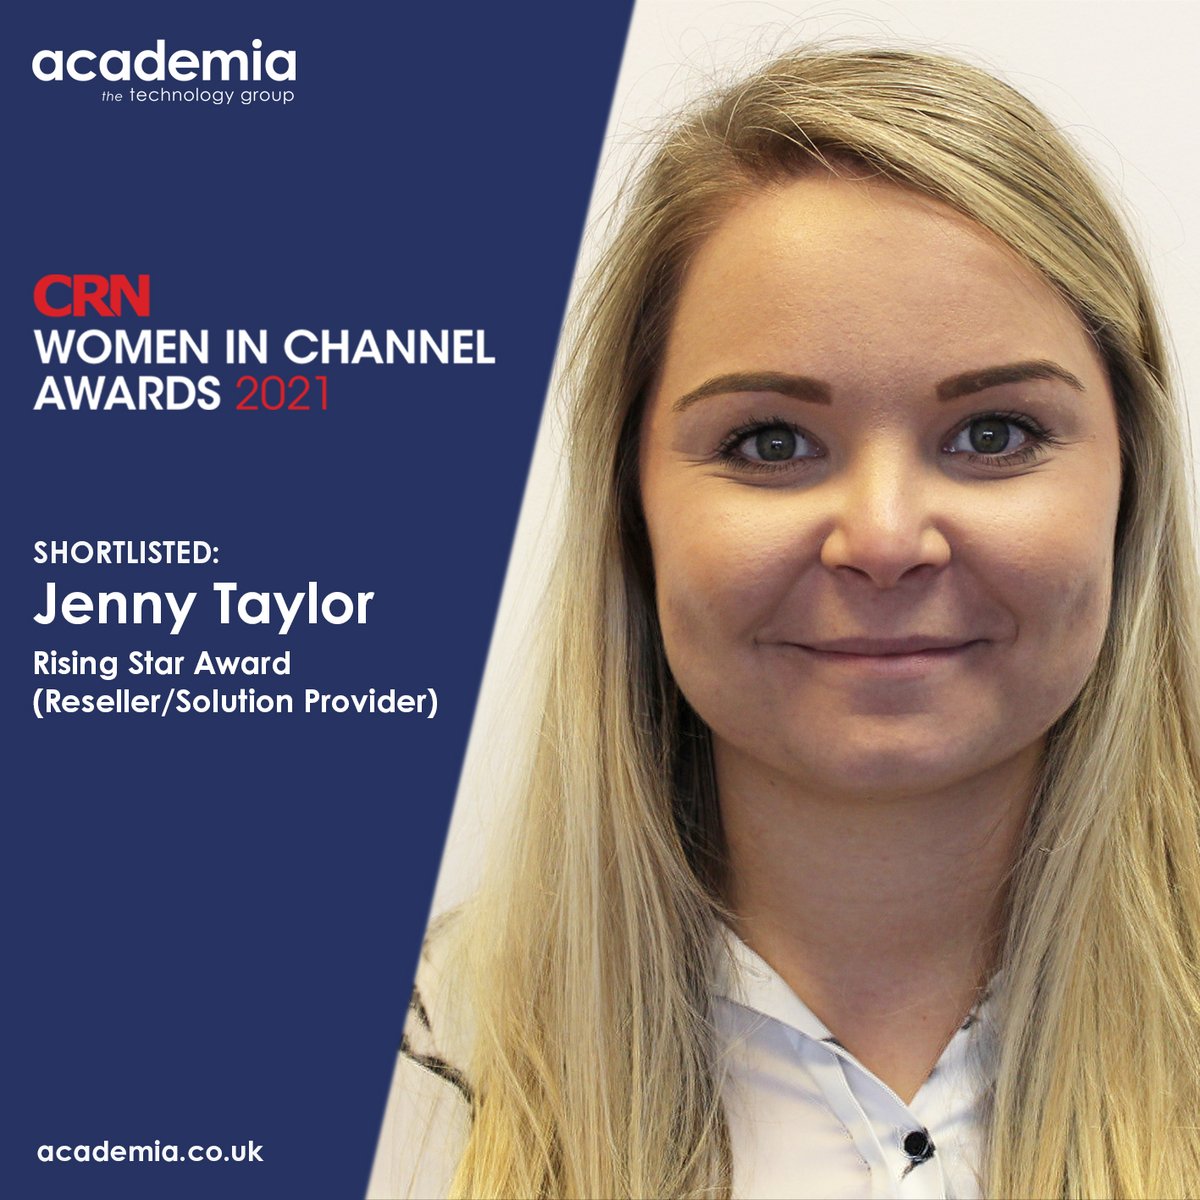 Good luck to Jenny Taylor who has been shortlisted for ‘Rising star award’ at the CRN Women in Channel Awards 2021.

#WomeinChannel #CRN https://t.co/GbAVzIJgR8